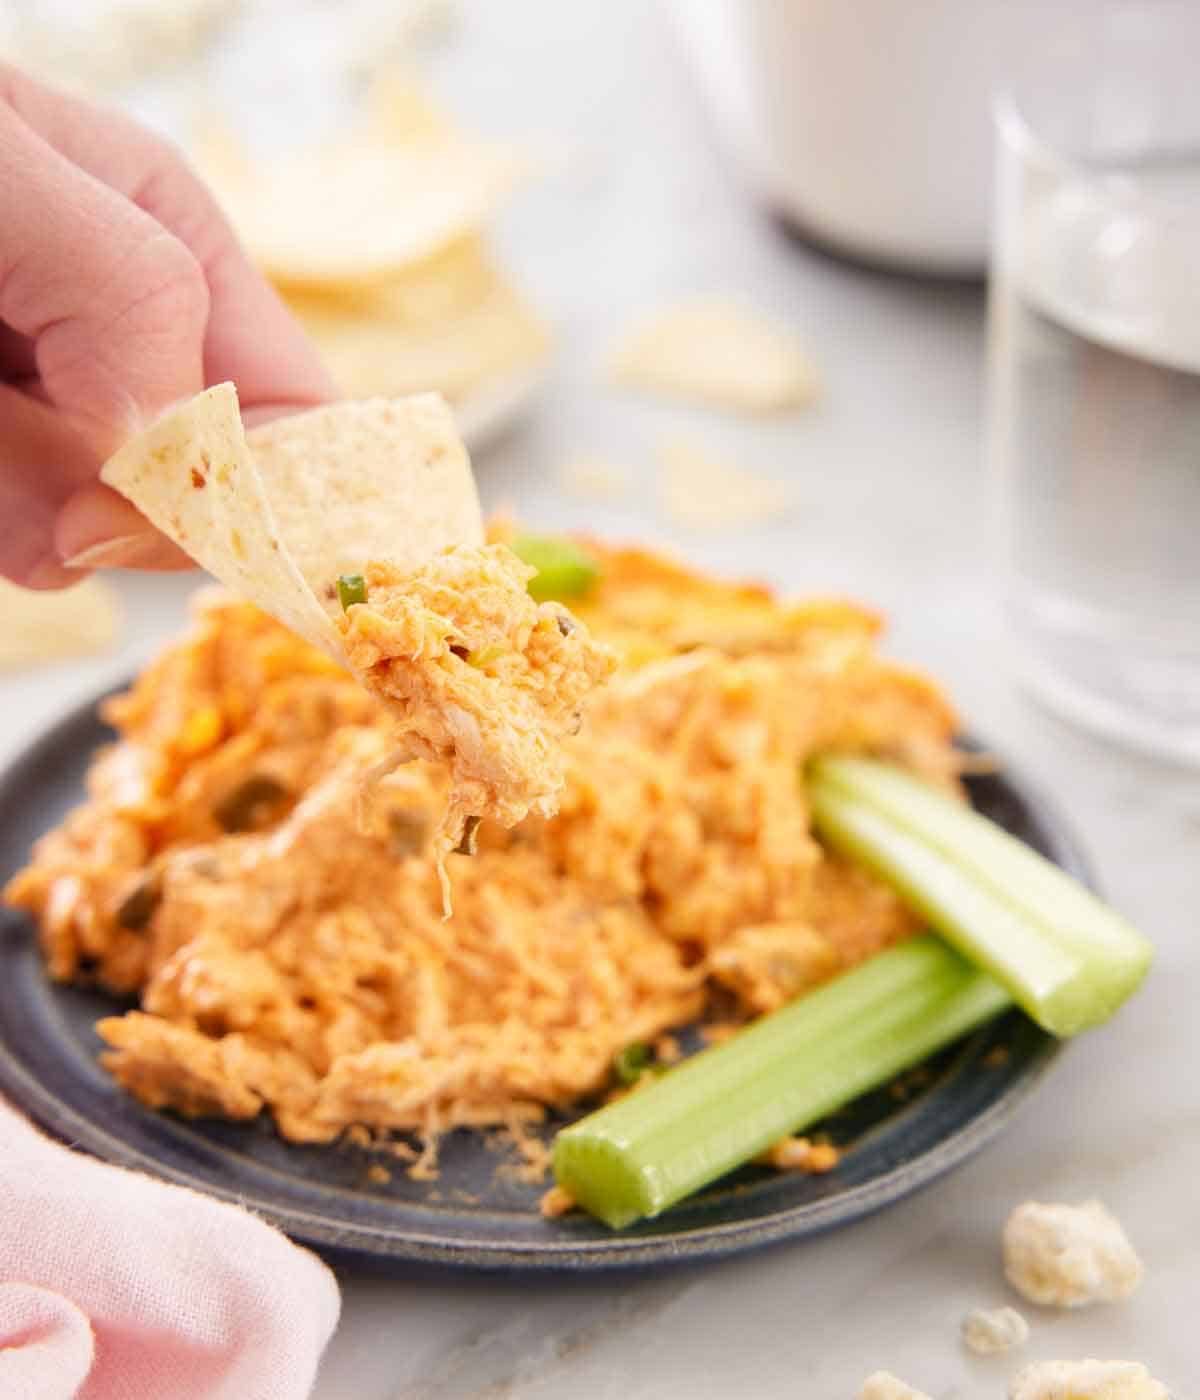 A tortilla chip held up with a scoop of buffalo chicken dip with a plate out of focus in the background.